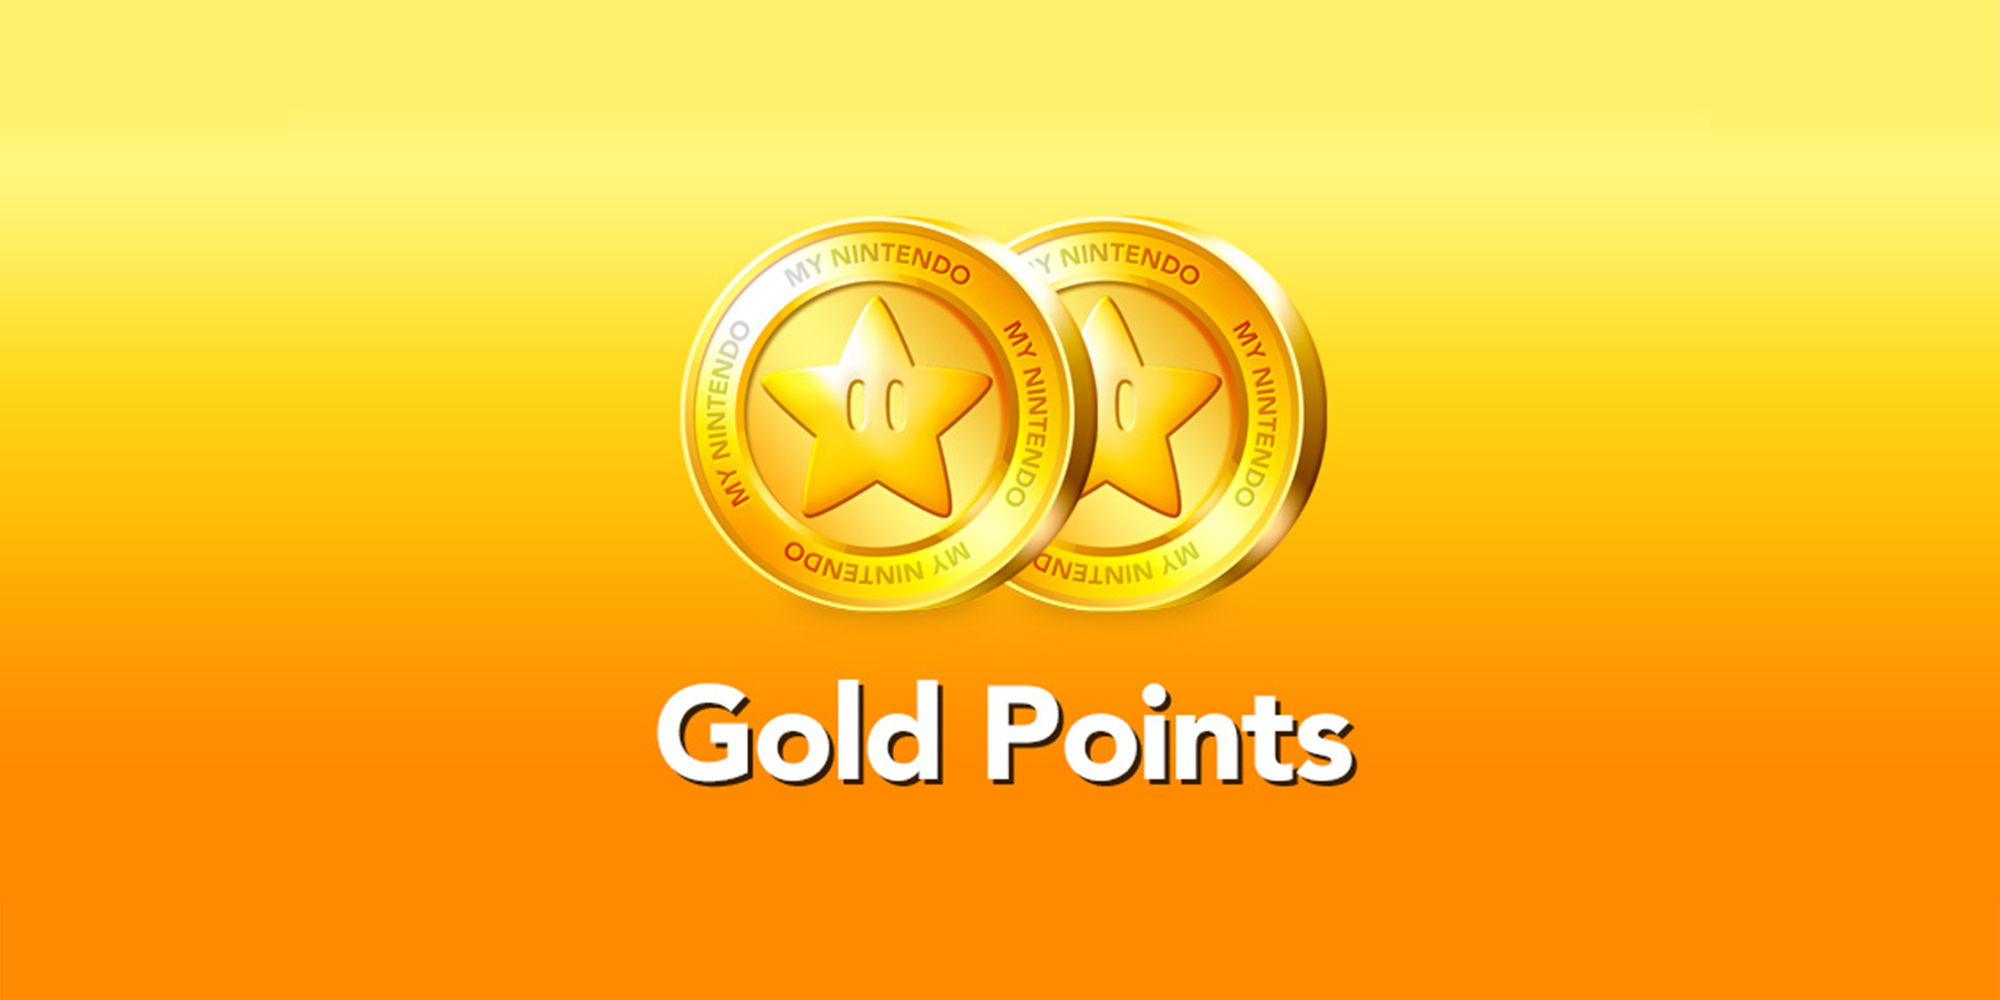 Use your Gold Points and save on your next Nintendo eShop purchase!